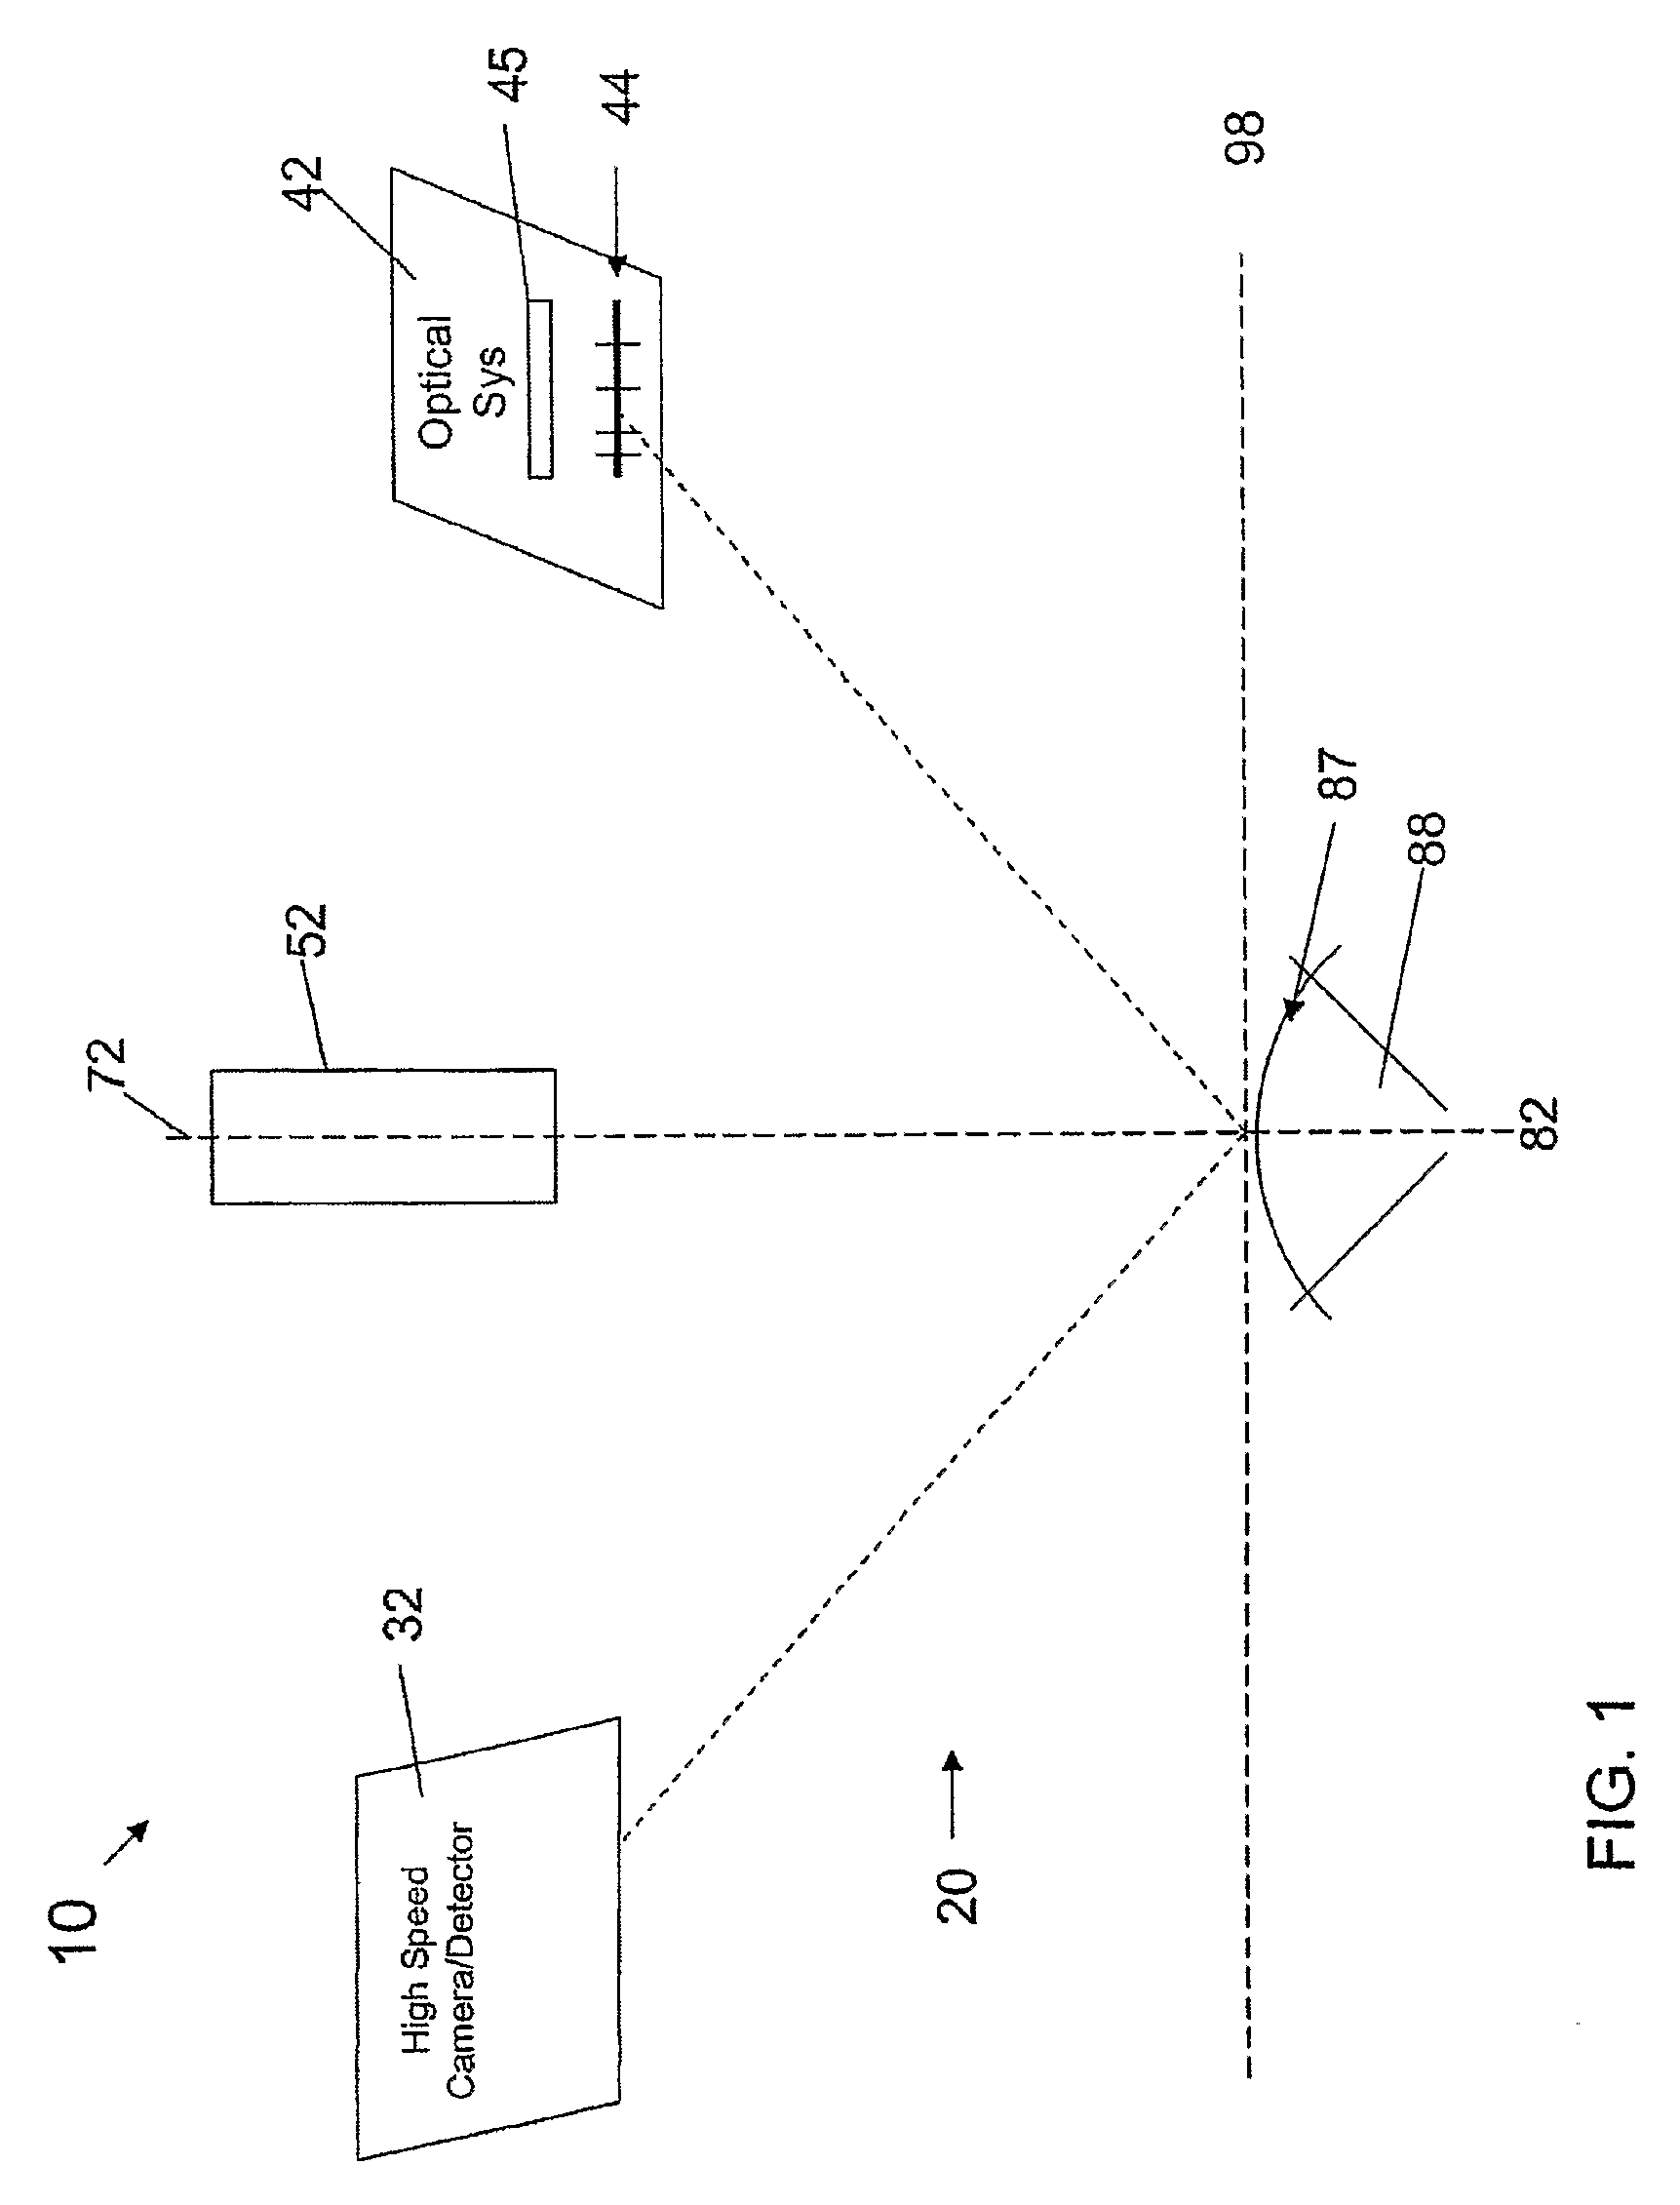 Method and apparatus for measuring the deformation characteristics of an object